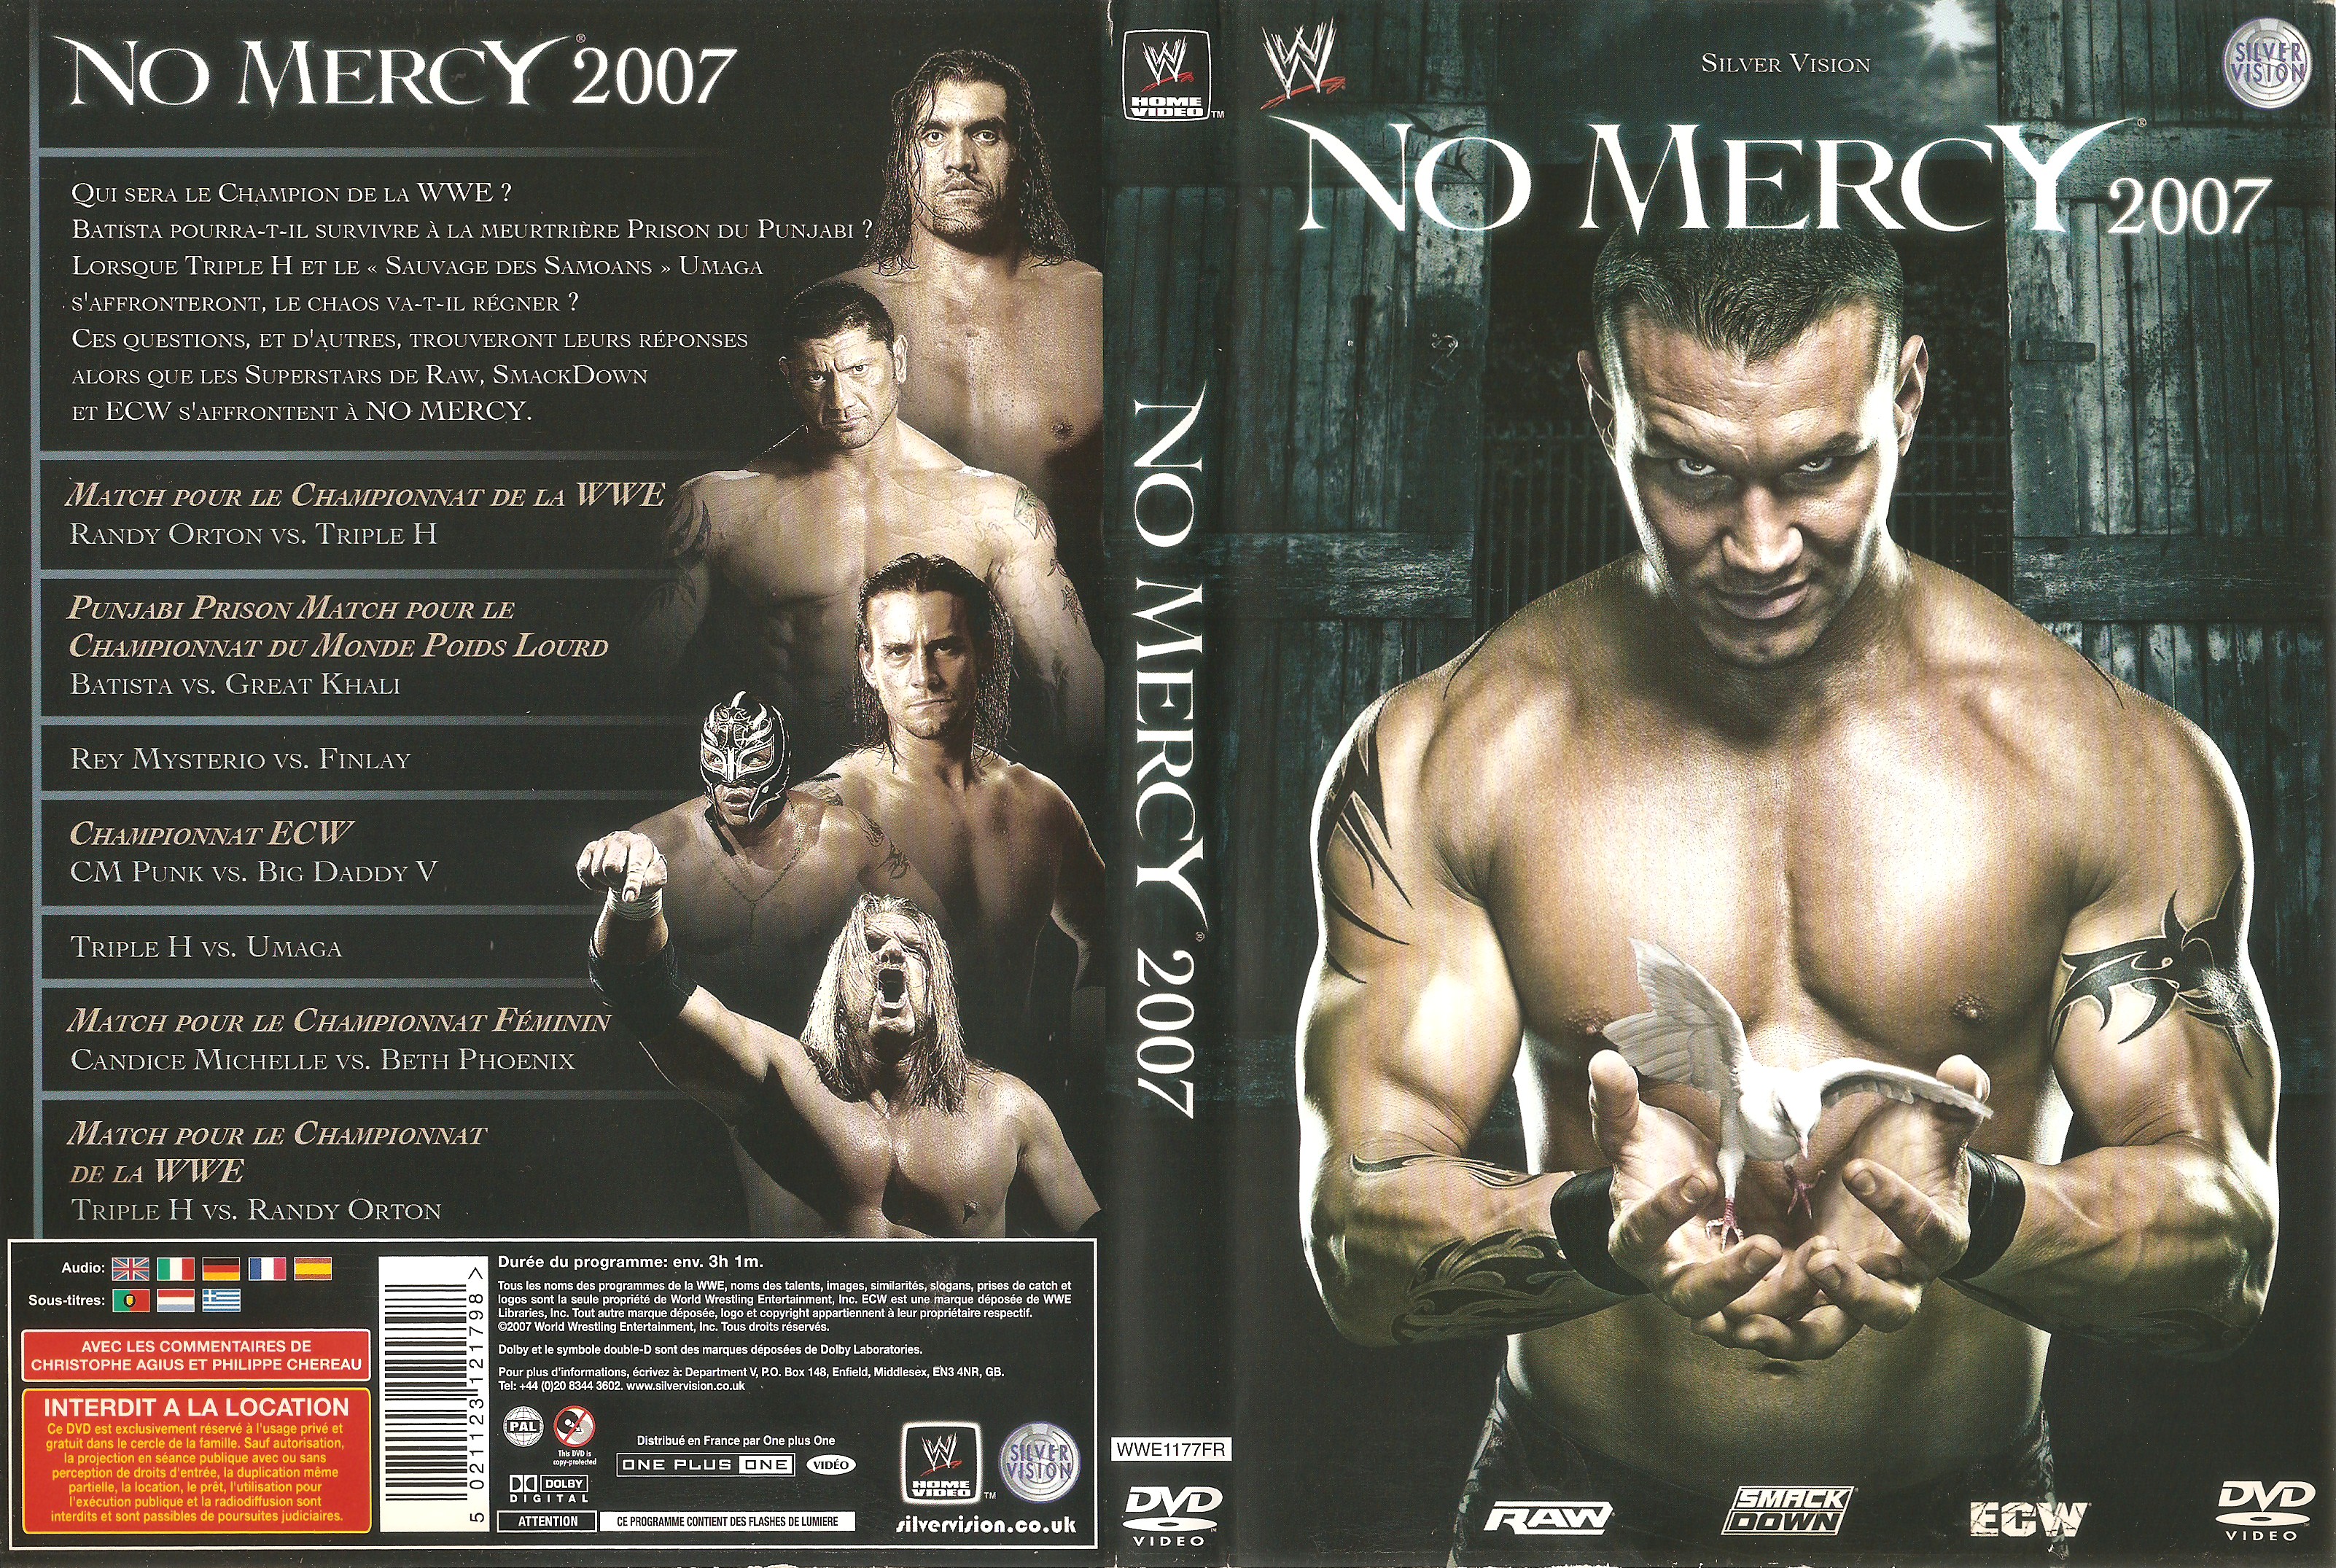 Jaquette DVD WWE No Mercy 2007